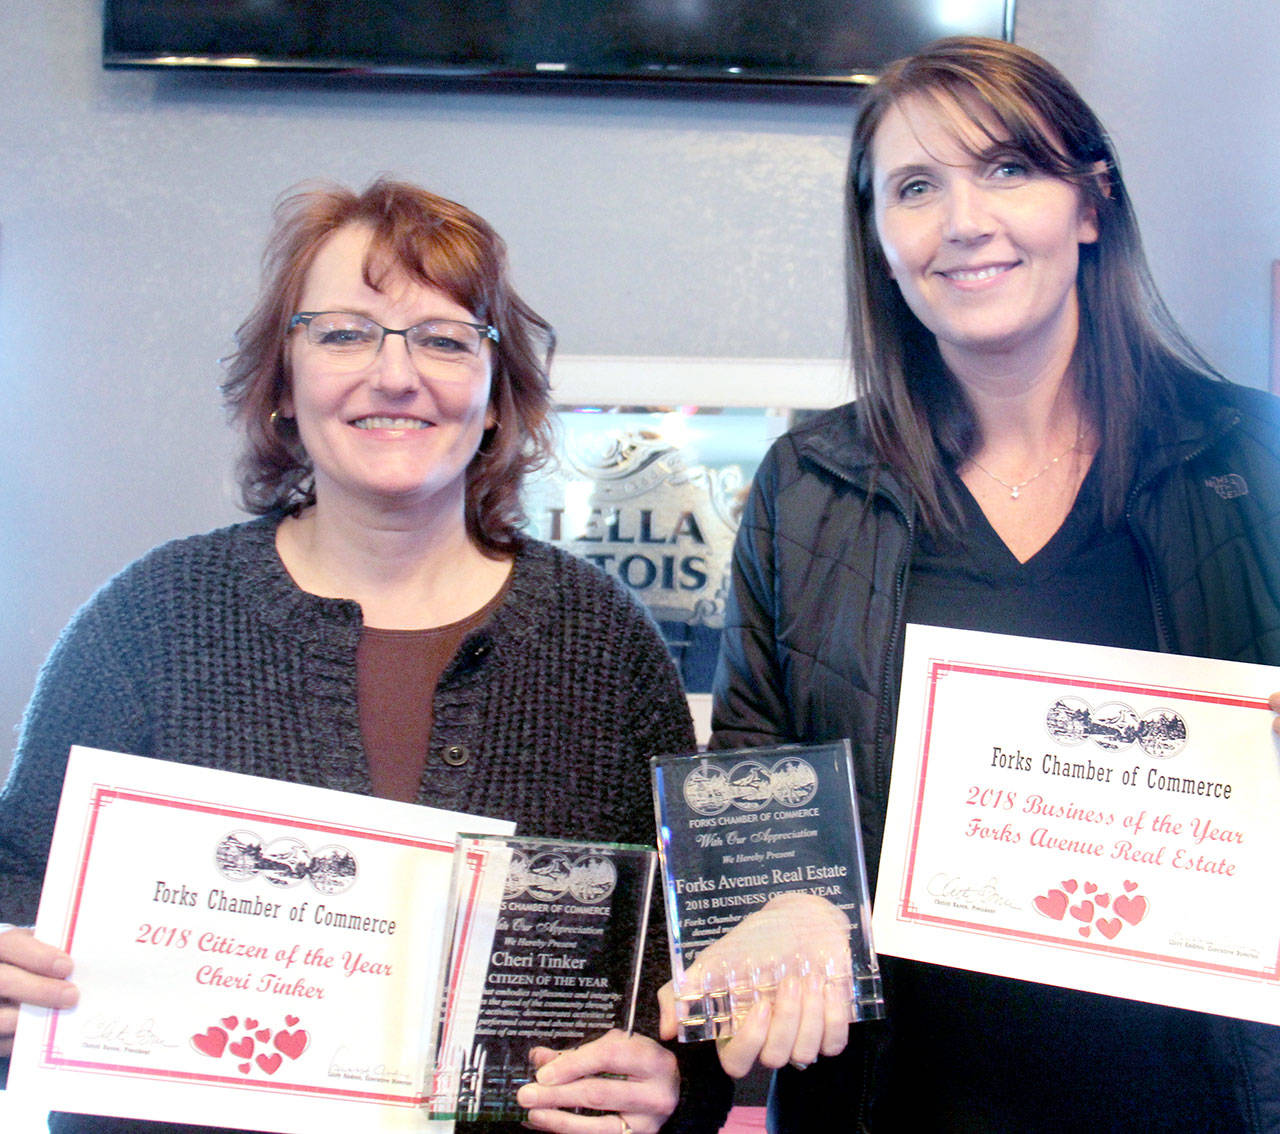 Cheri Tinker, left, of North Olympic Regional Veterans’ Housing Network and Erin Queen of Forks Avenue Real Estate received two of the Forks Chamber of Commerce’s “Best of” awards.